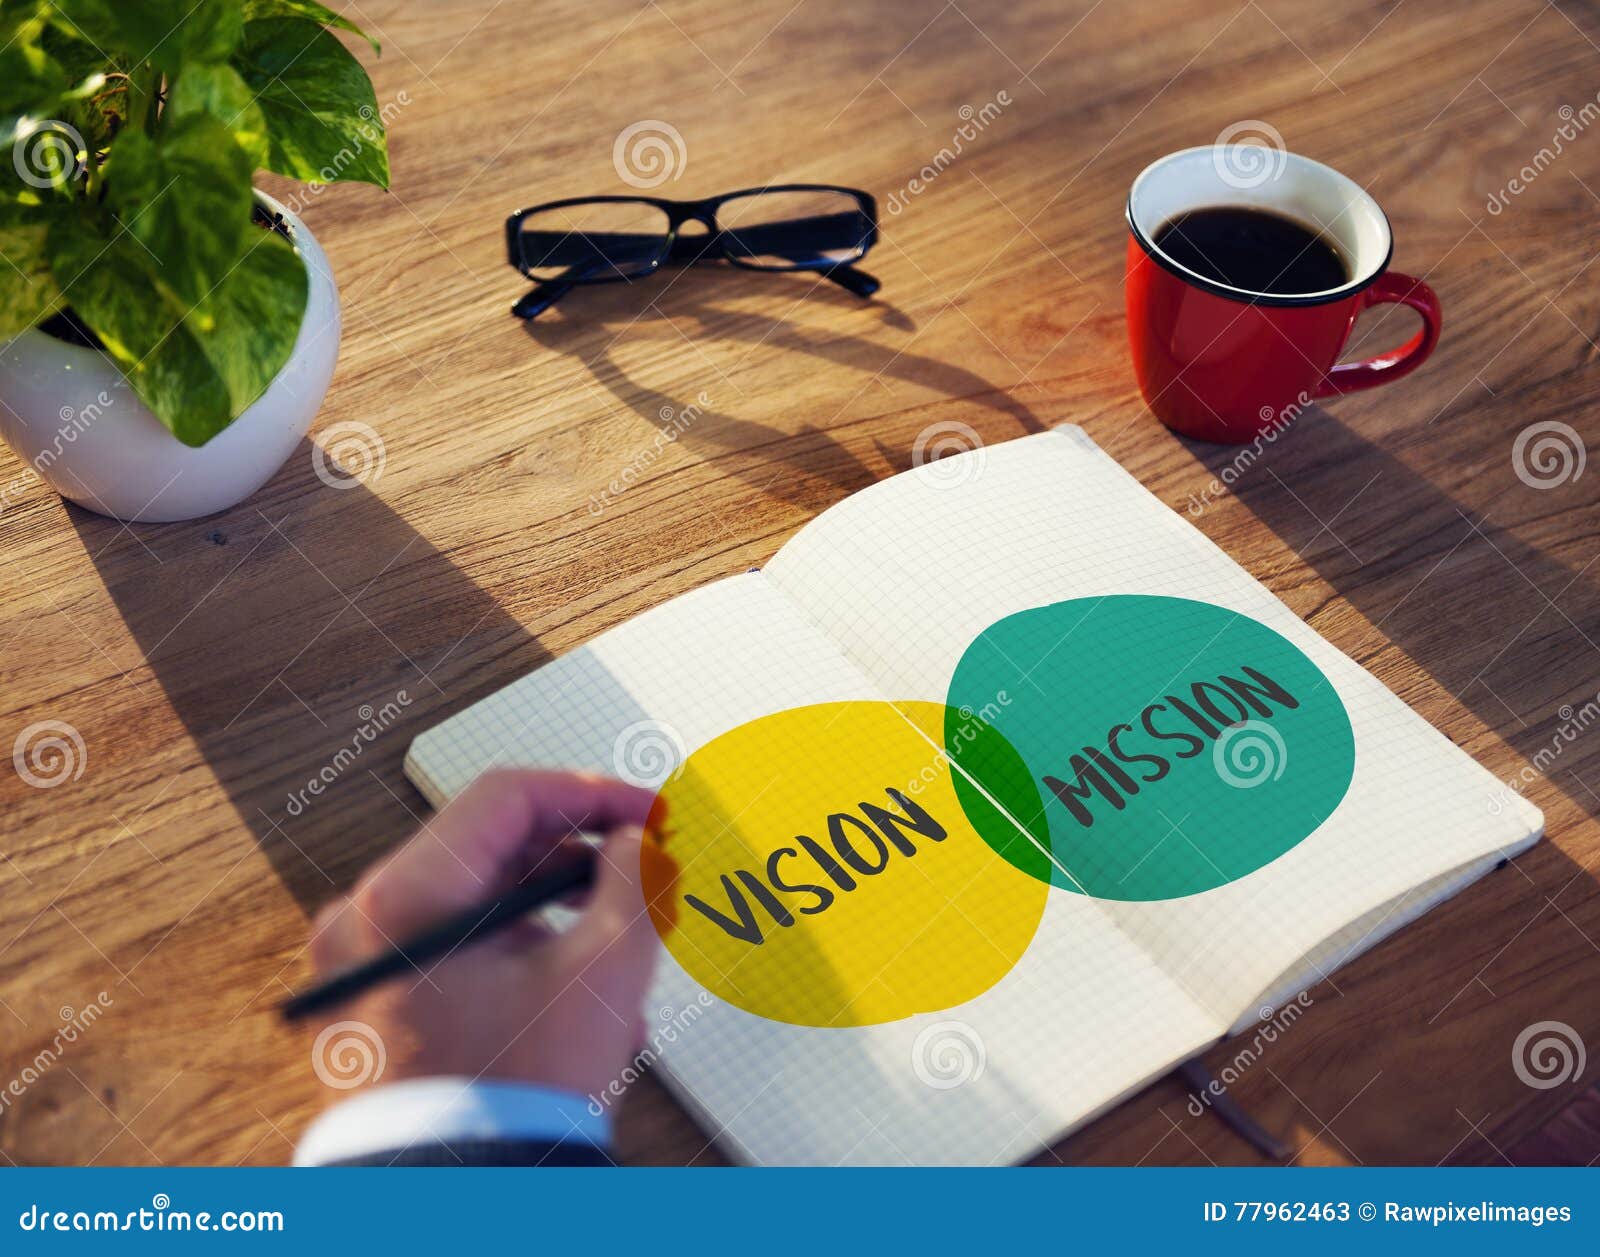 business vision mission graphic concept